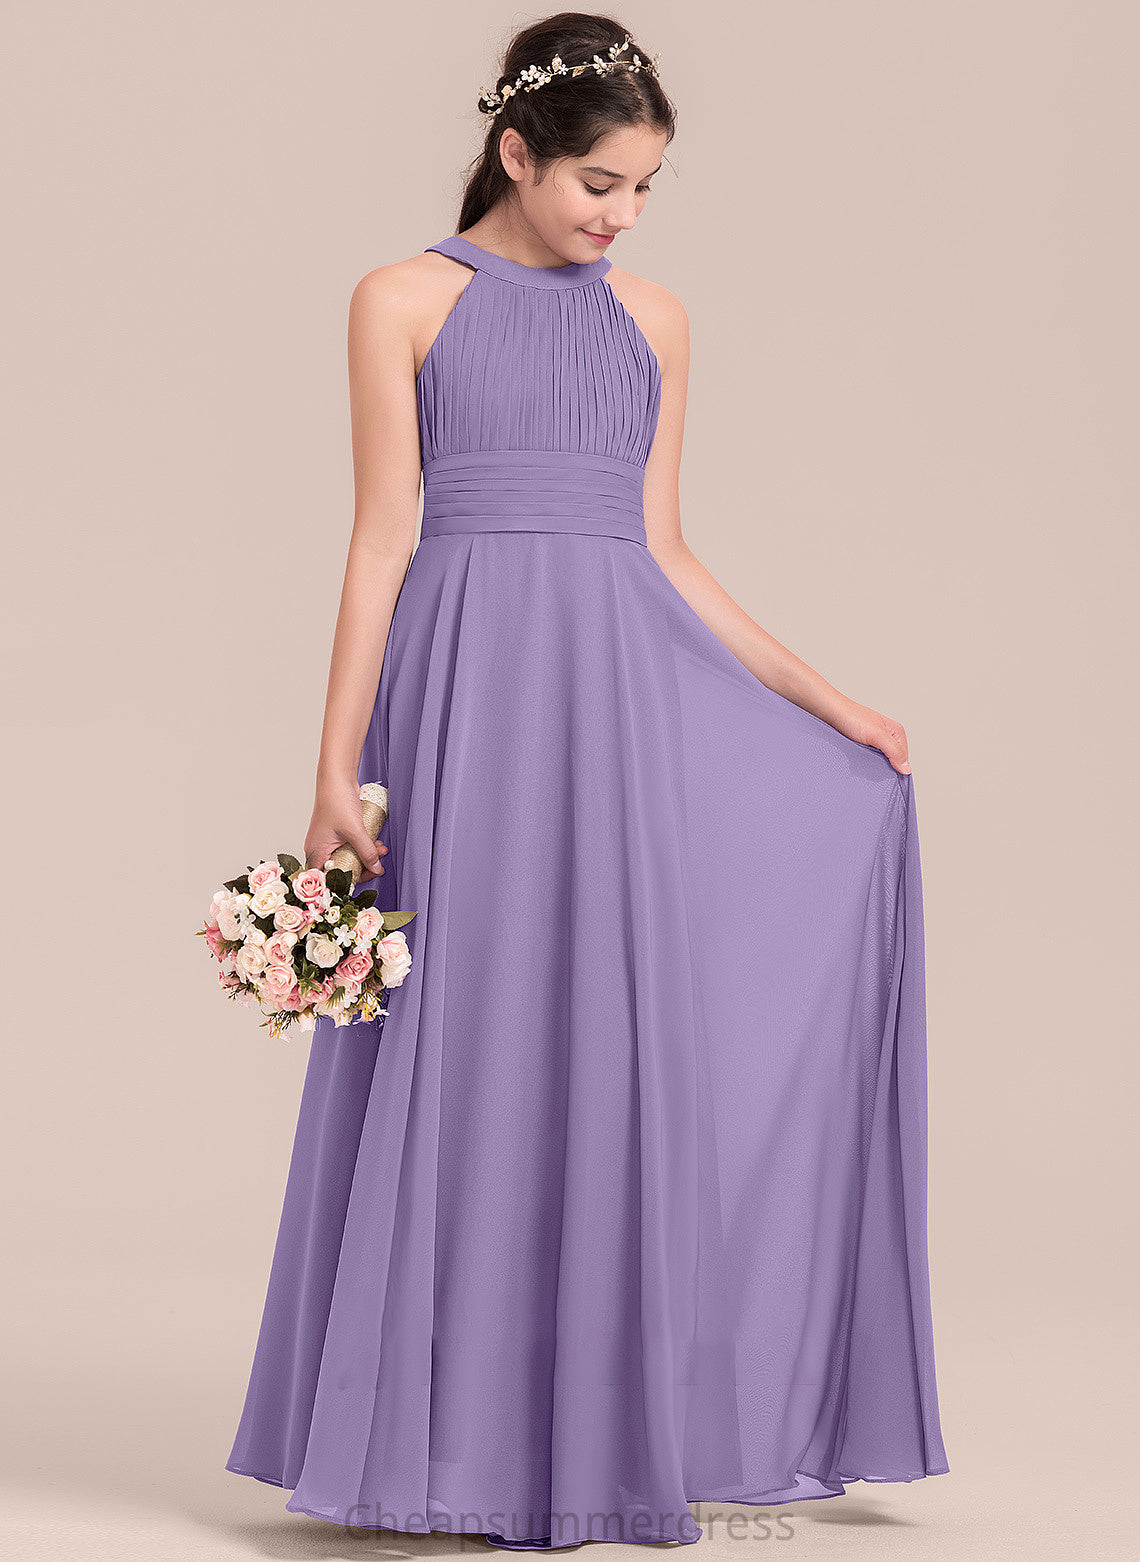 Scoop Neck Chiffon Ruffle With A-Line Junior Bridesmaid Dresses Floor-Length Maggie